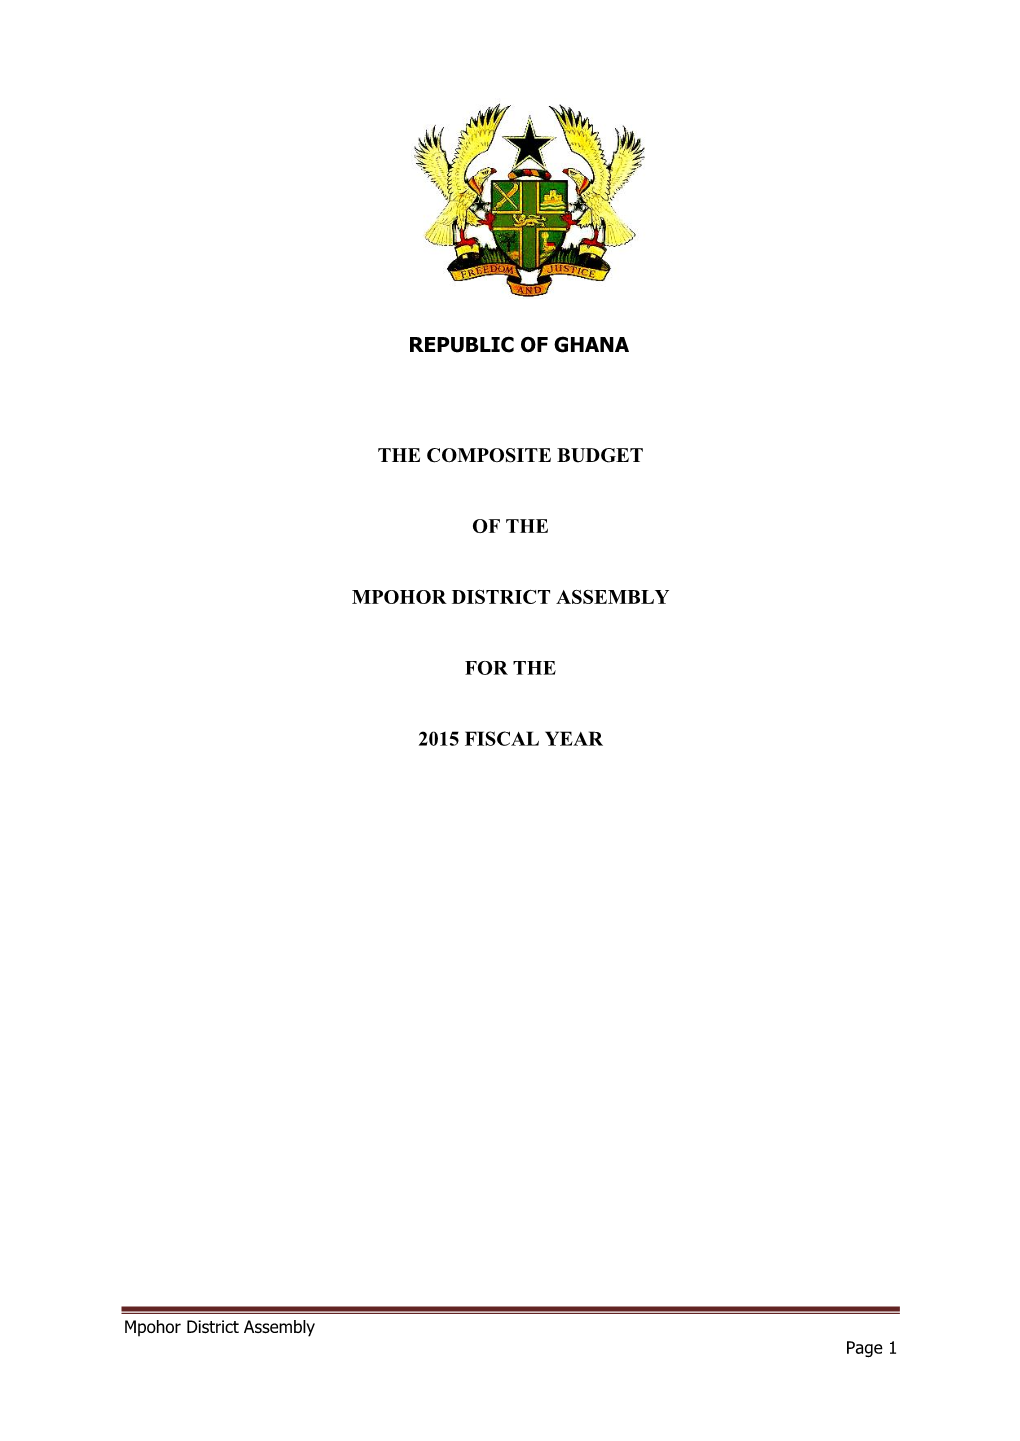 The Composite Budget of the Mpohor District Assembly for the 2015 Fiscal